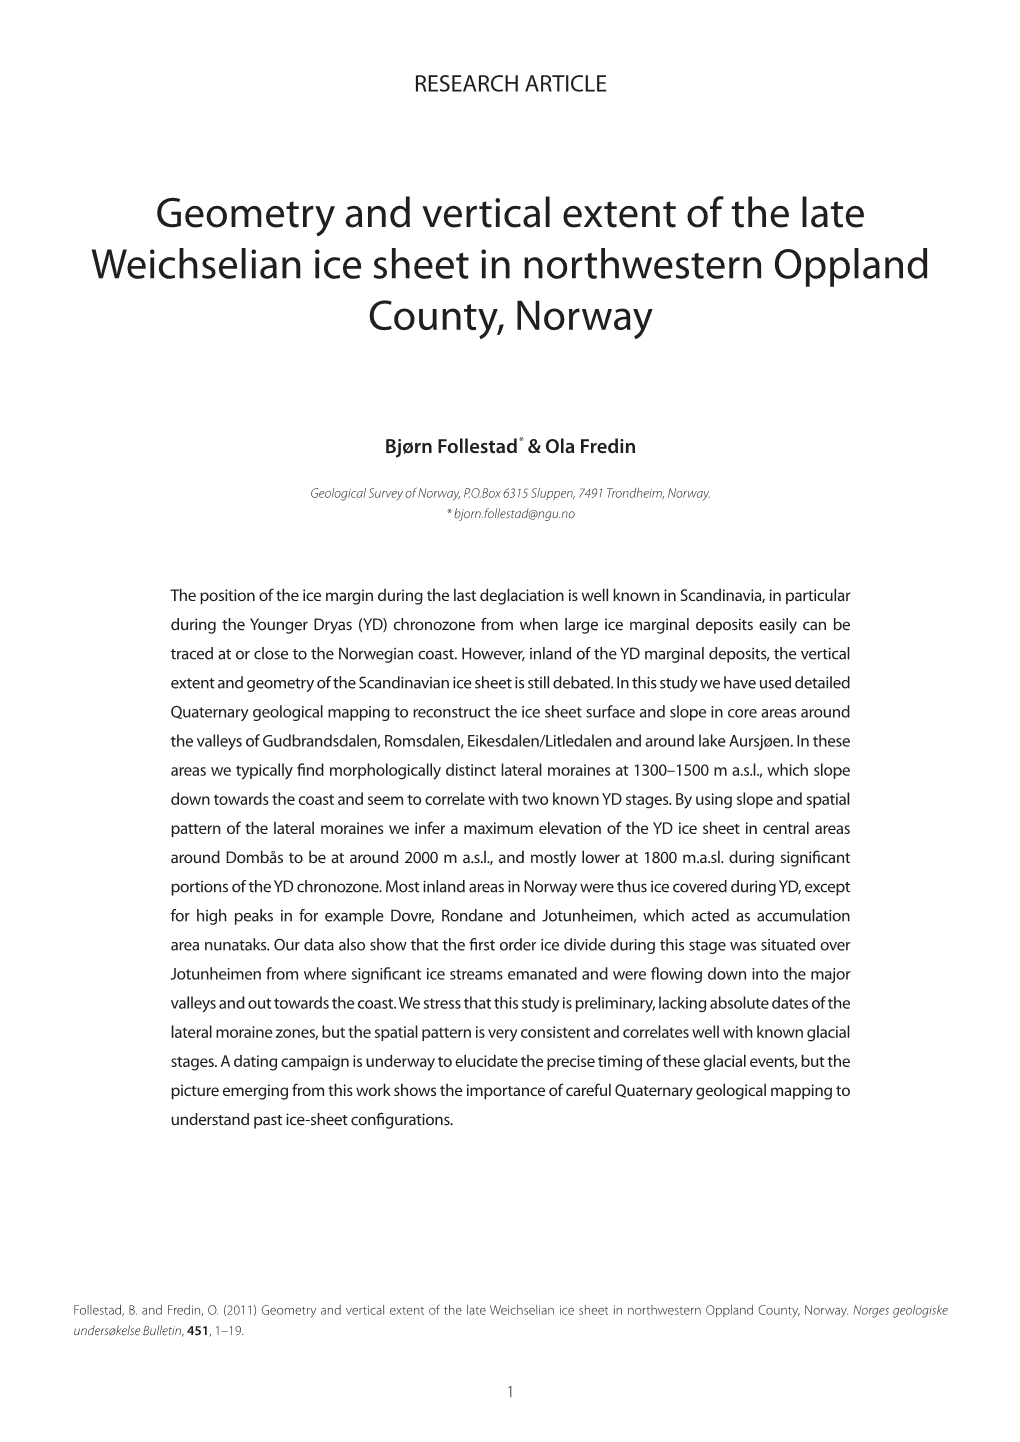 Geometry and Vertical Extent of the Late Weichselian Ice Sheet in Northwestern Oppland County, Norway